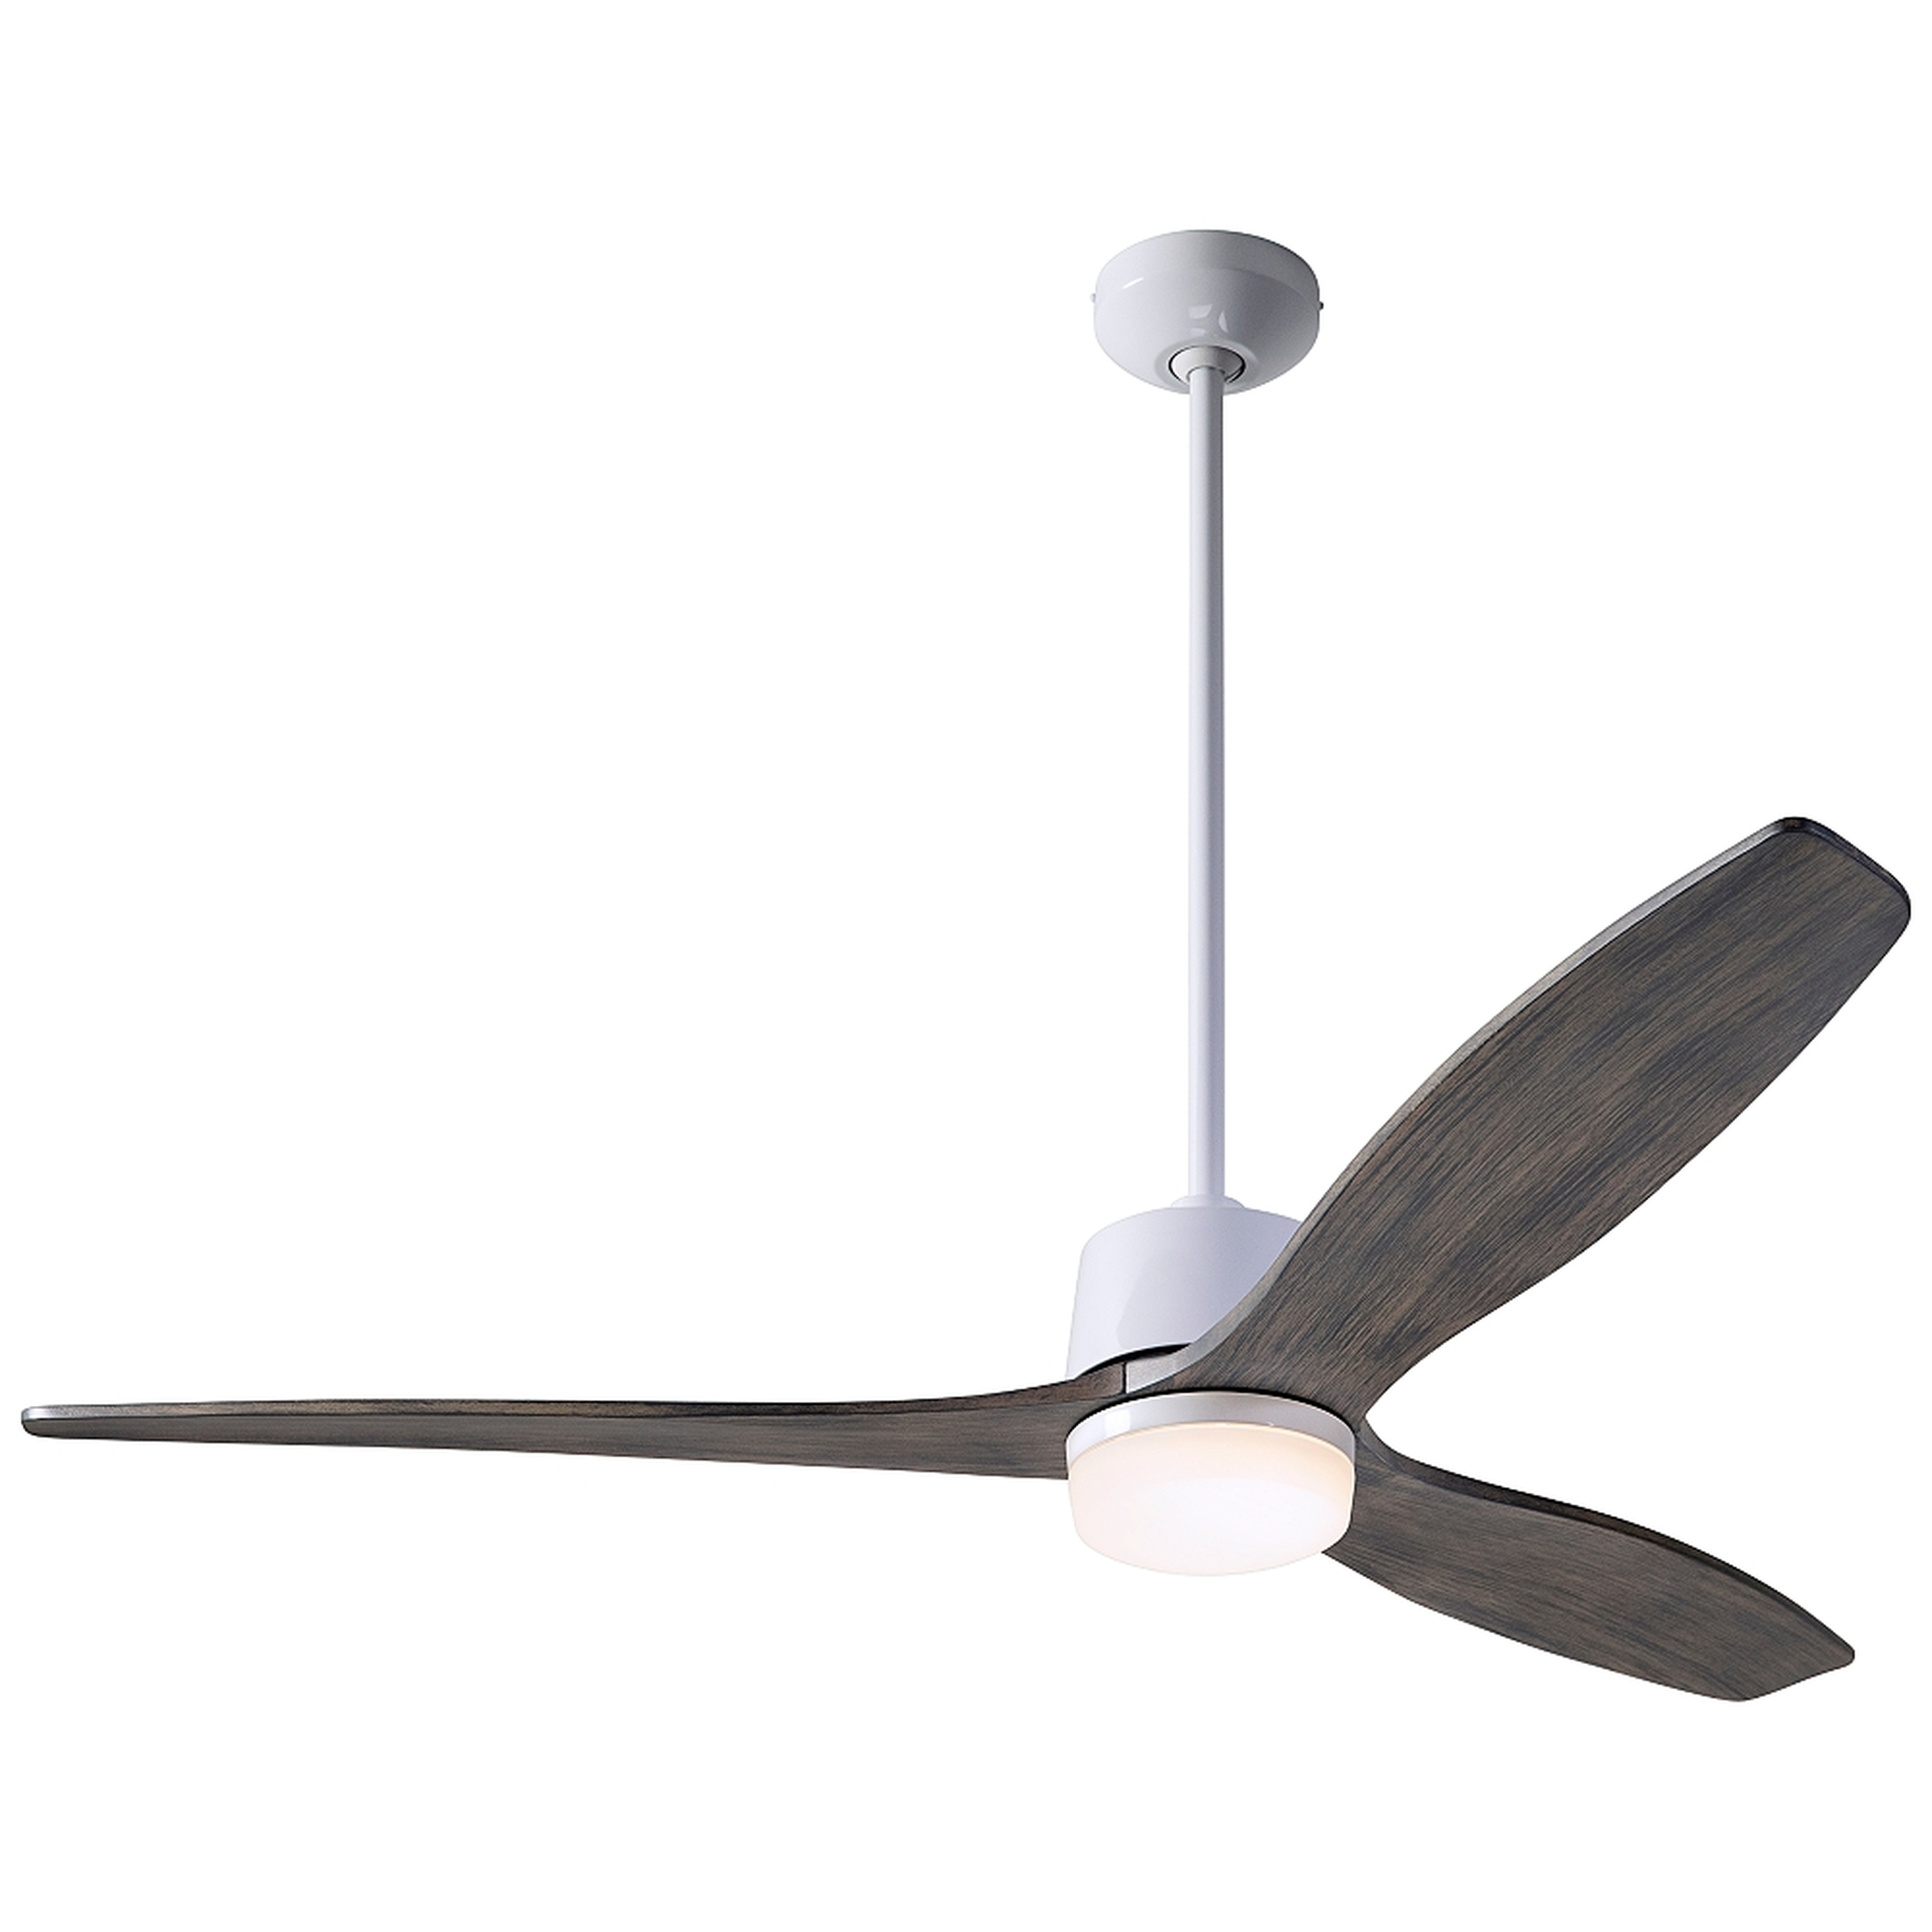 54" Modern Fan Arbor Gloss White and Graywash Damp LED Ceiling Fan - Style # 97F59 - Lamps Plus